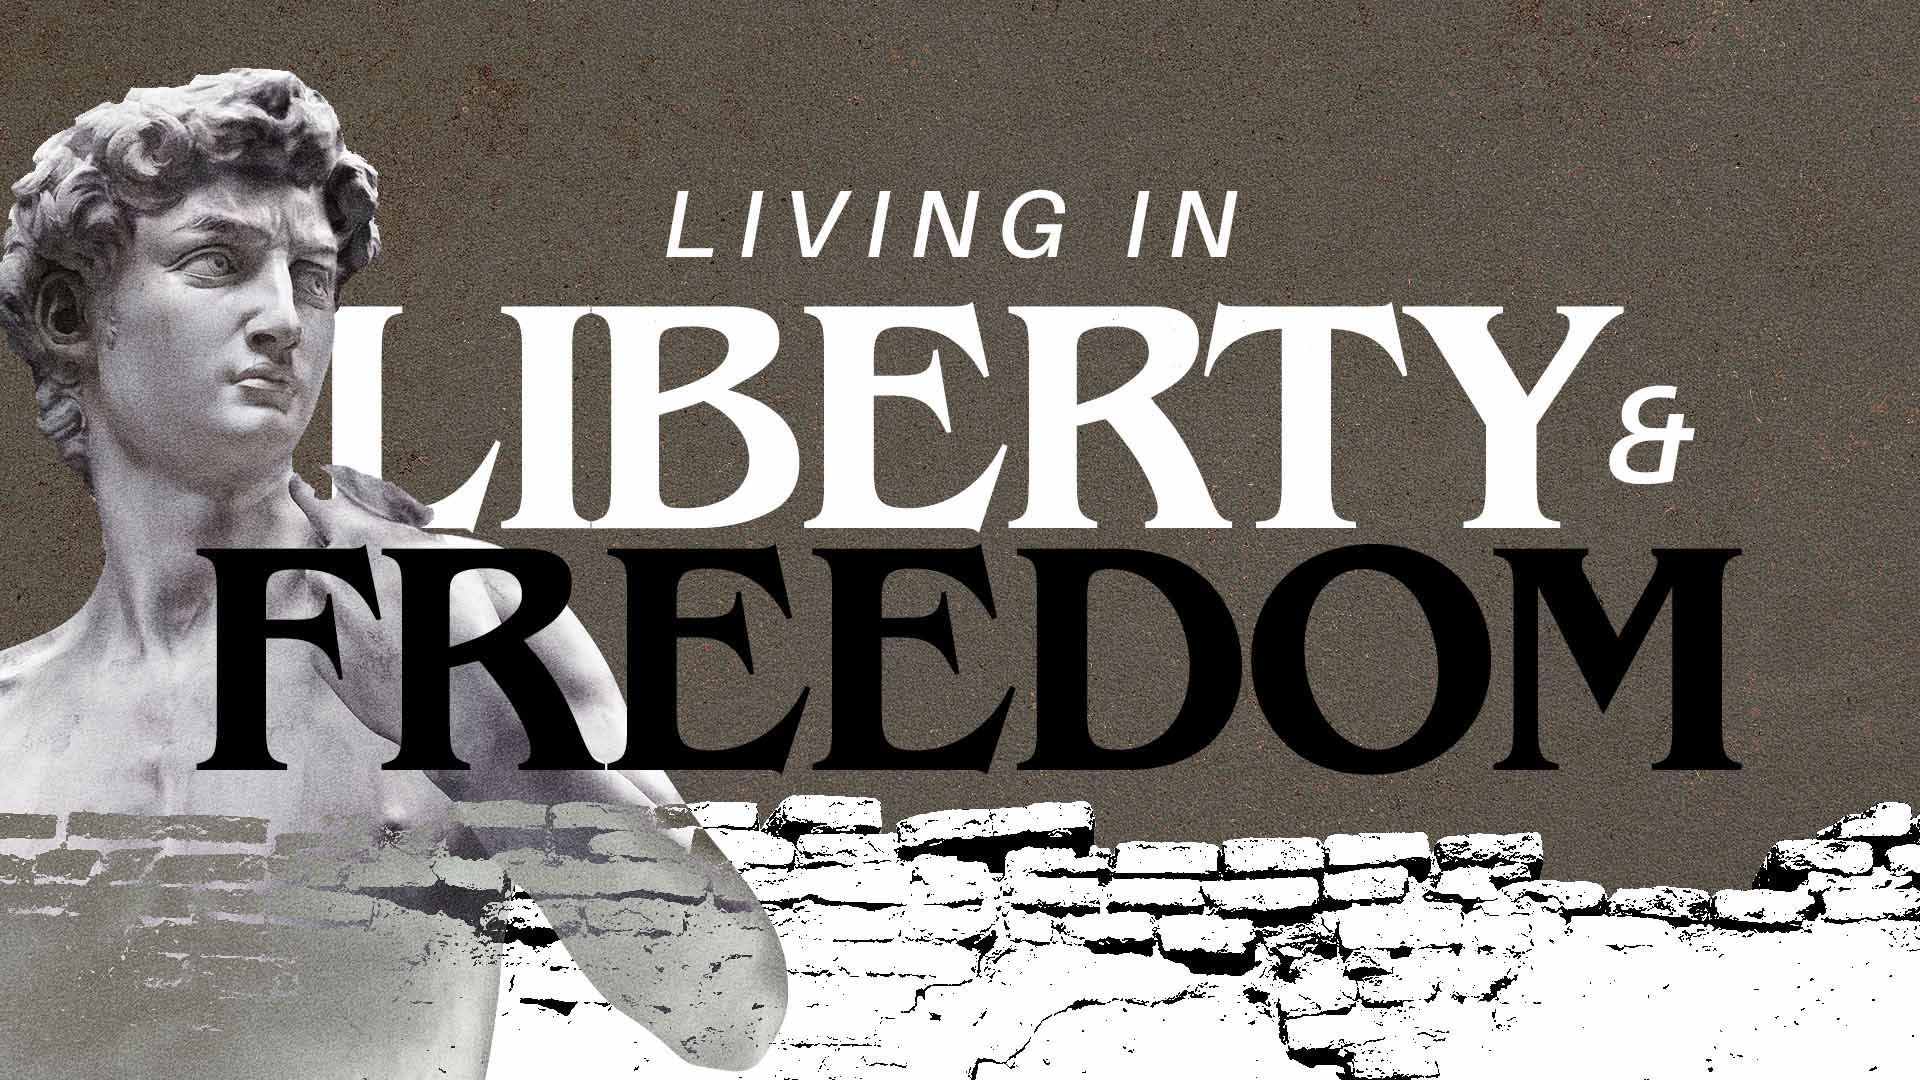 Living In Liberty And Freedom